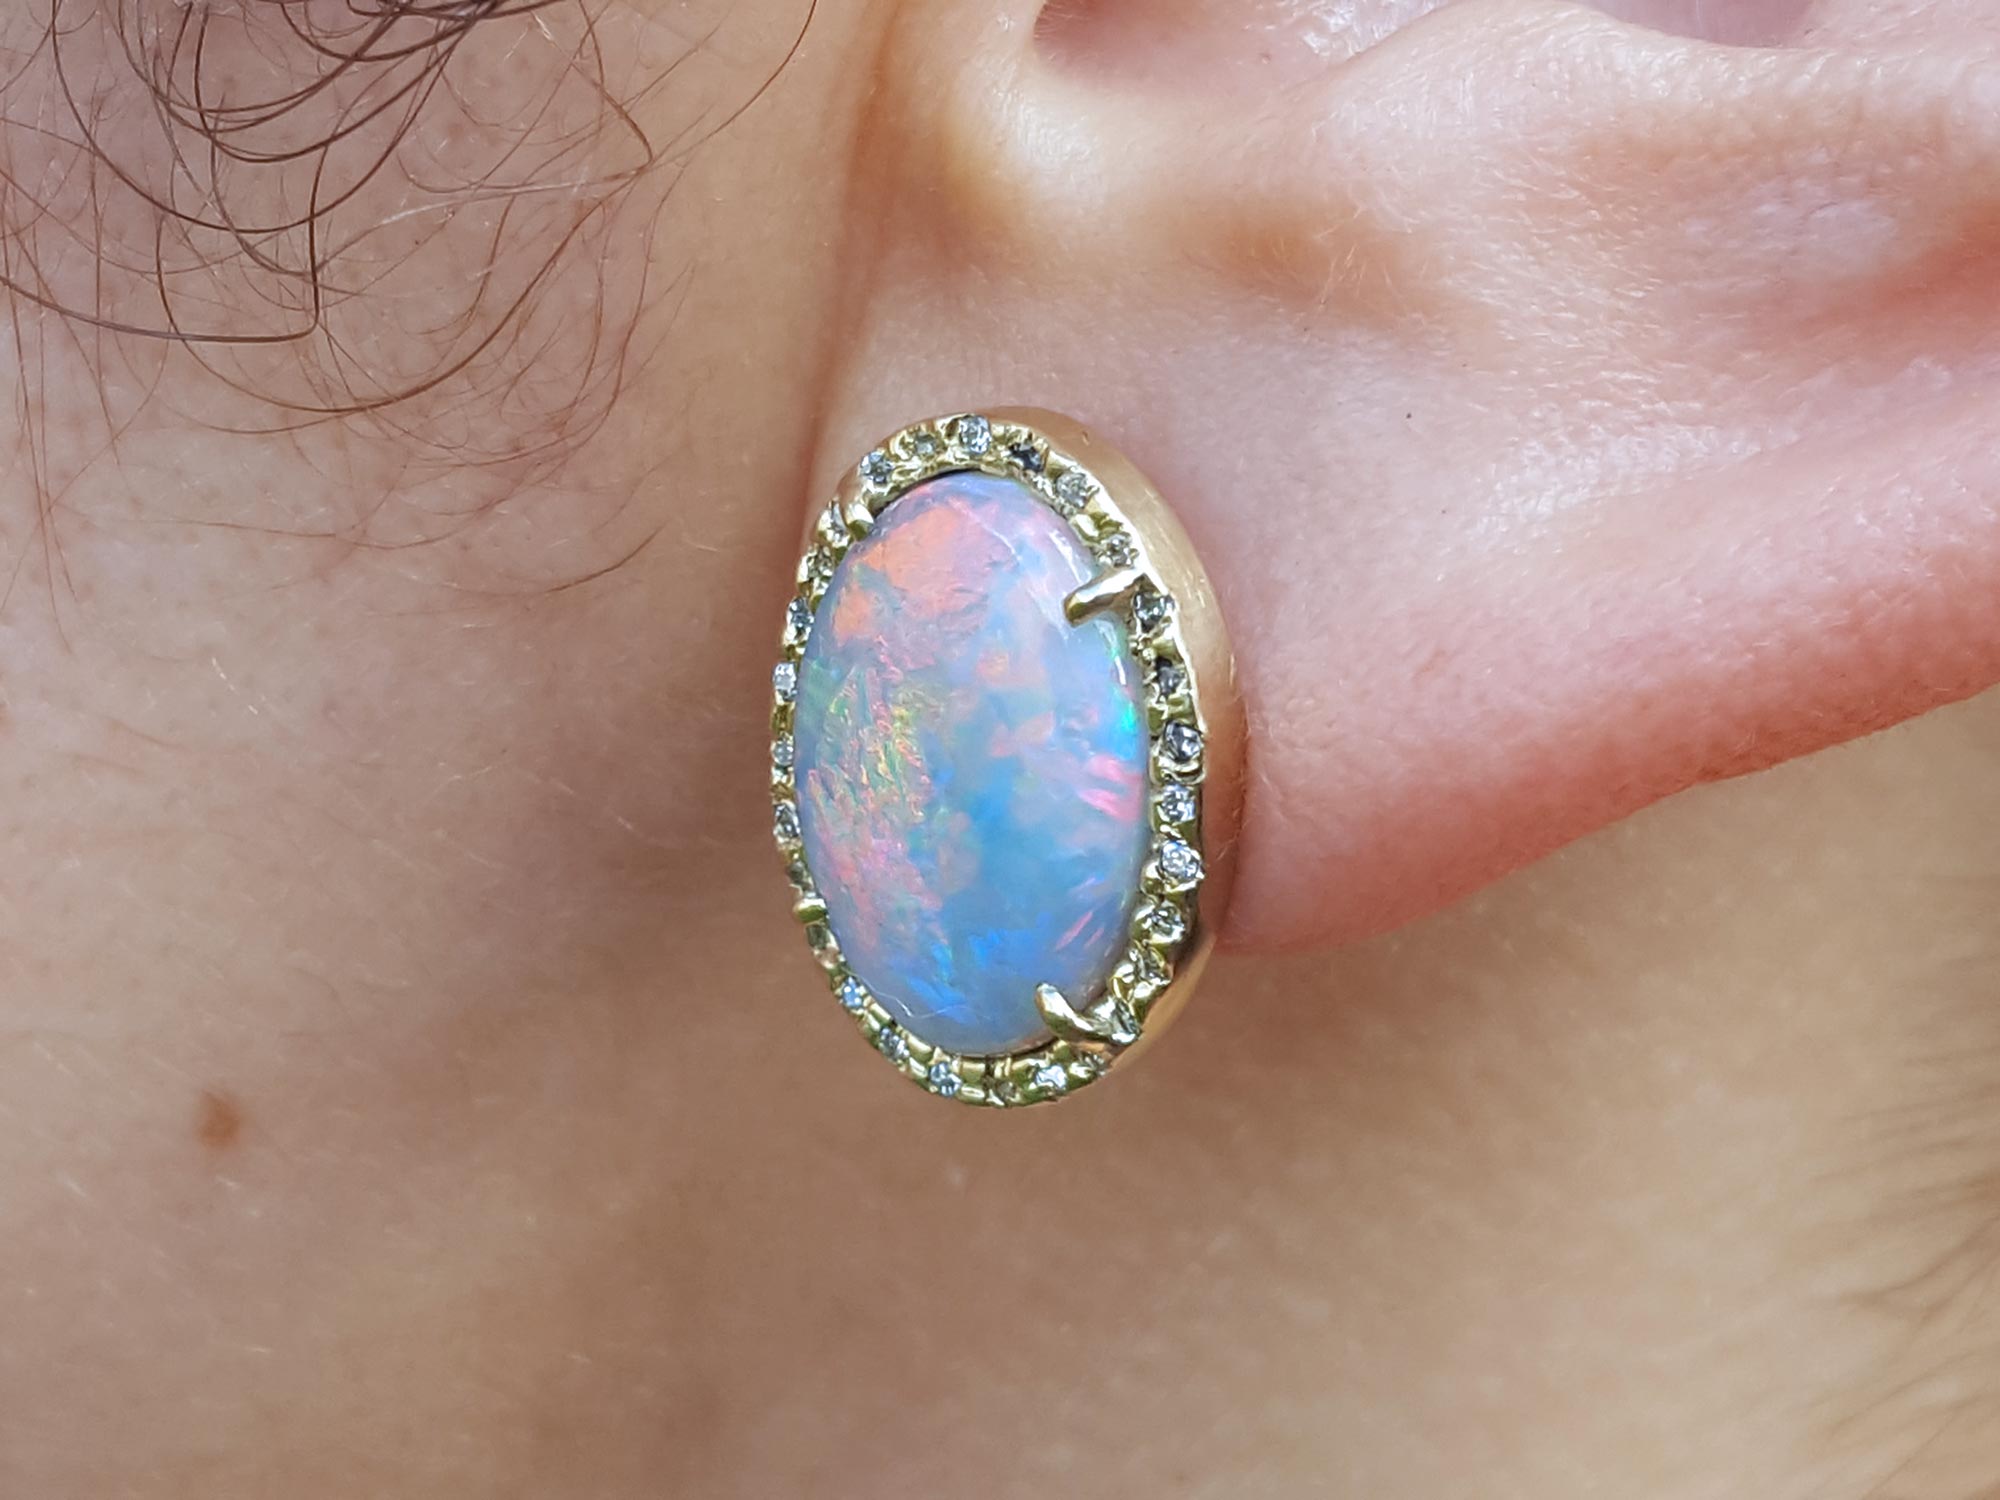 Solid opal solid gold earrings